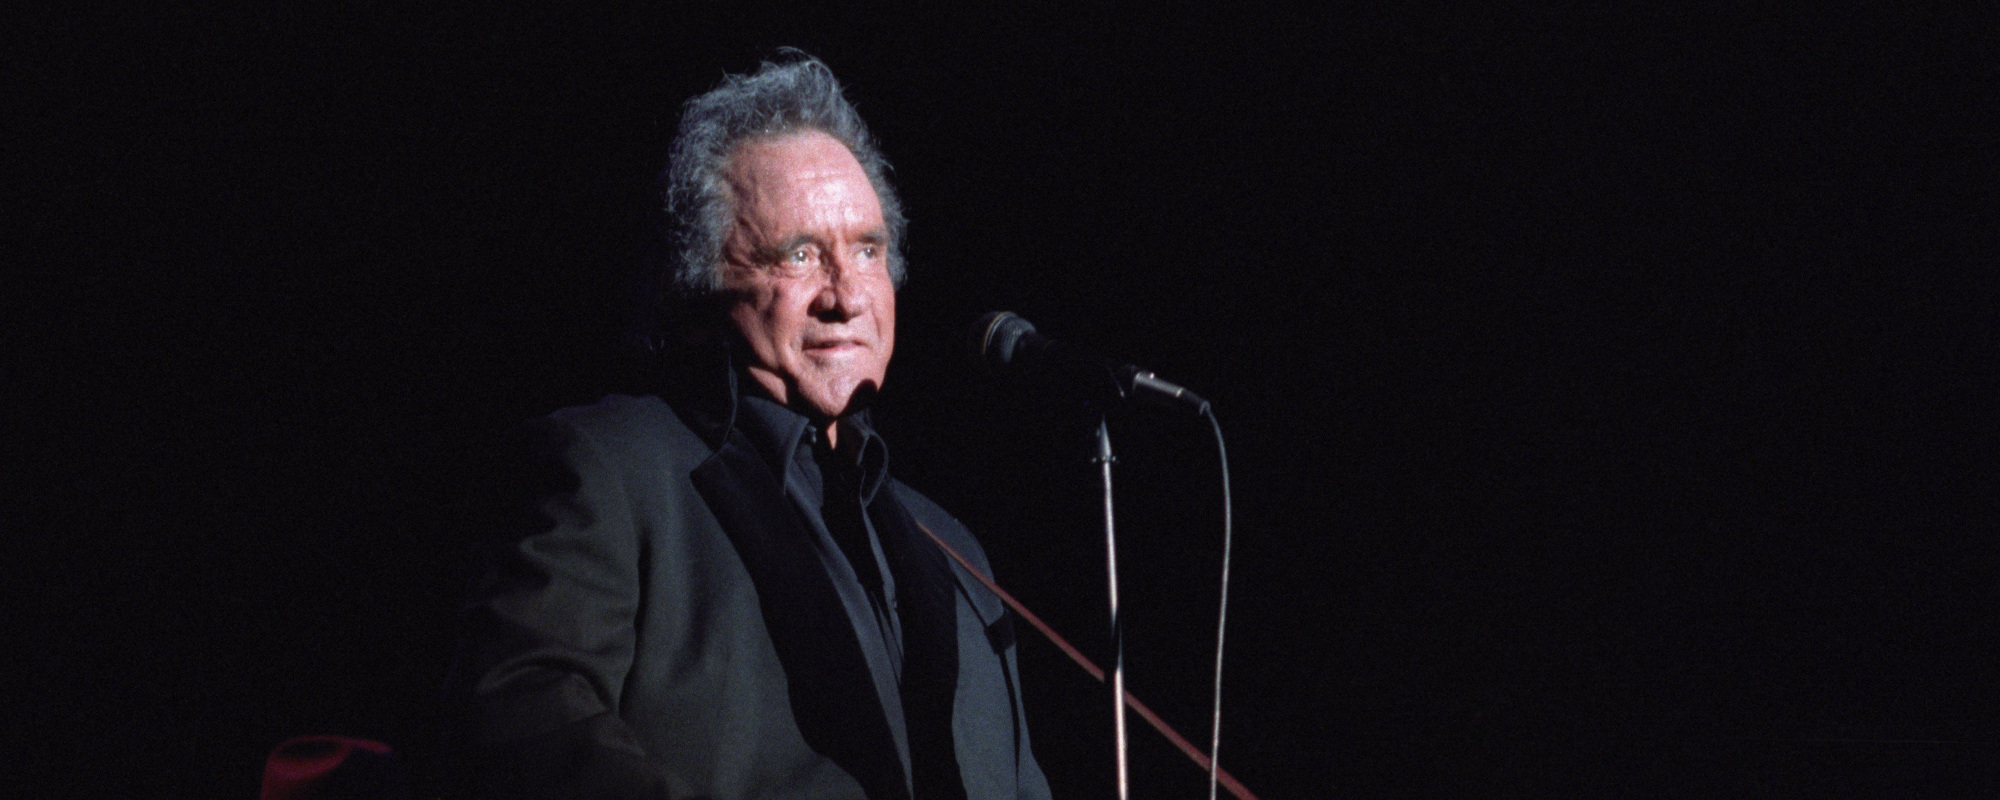 The Full Circle Story Behind Johnny Cash’s Final Song “Like the 309”